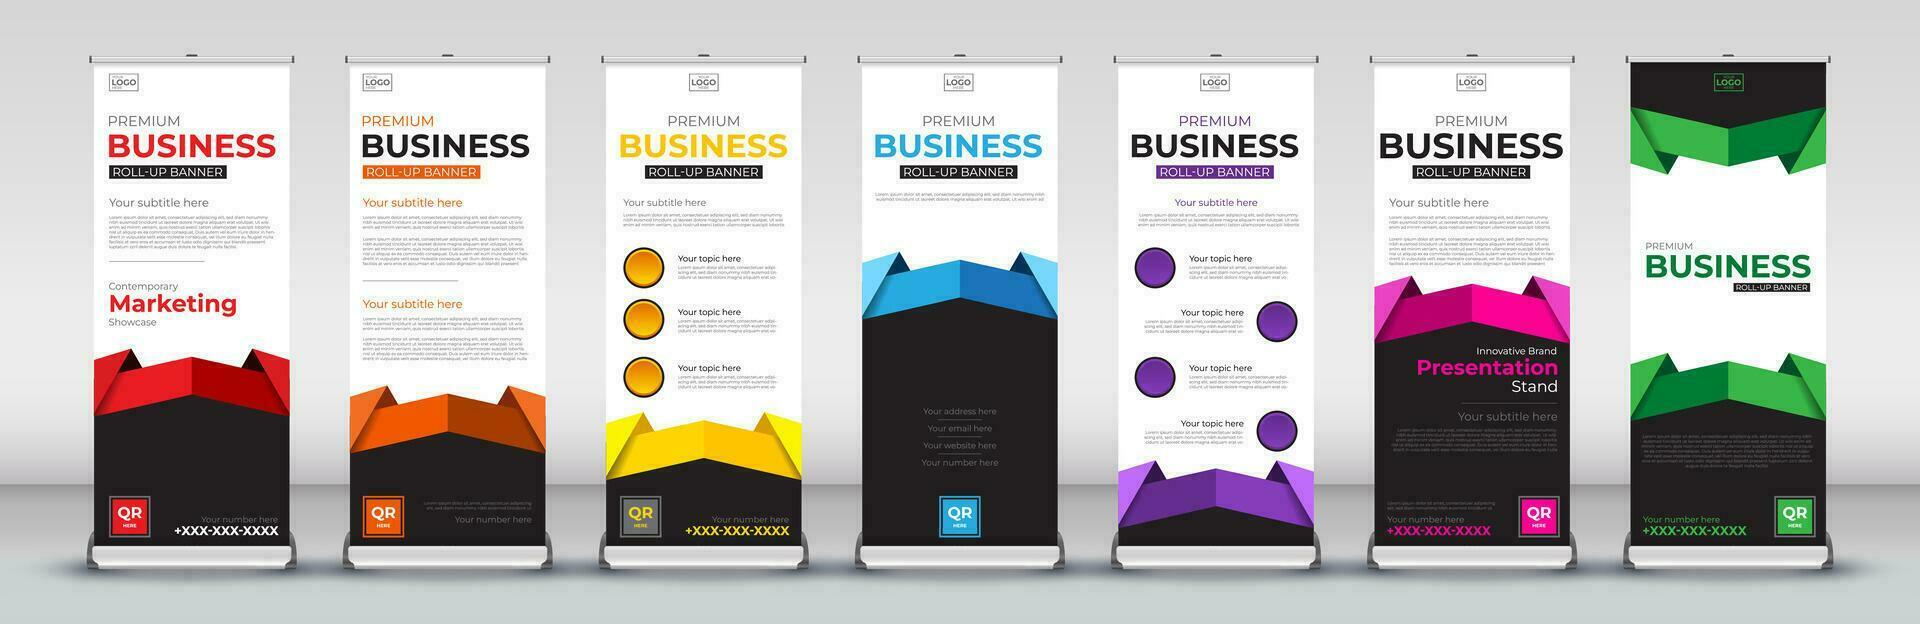 Roll up Banner template set for meetings, Street Business, presentations, annual events, events, exhibitions in red, blue, orange, purple, green, pink and yellow vector